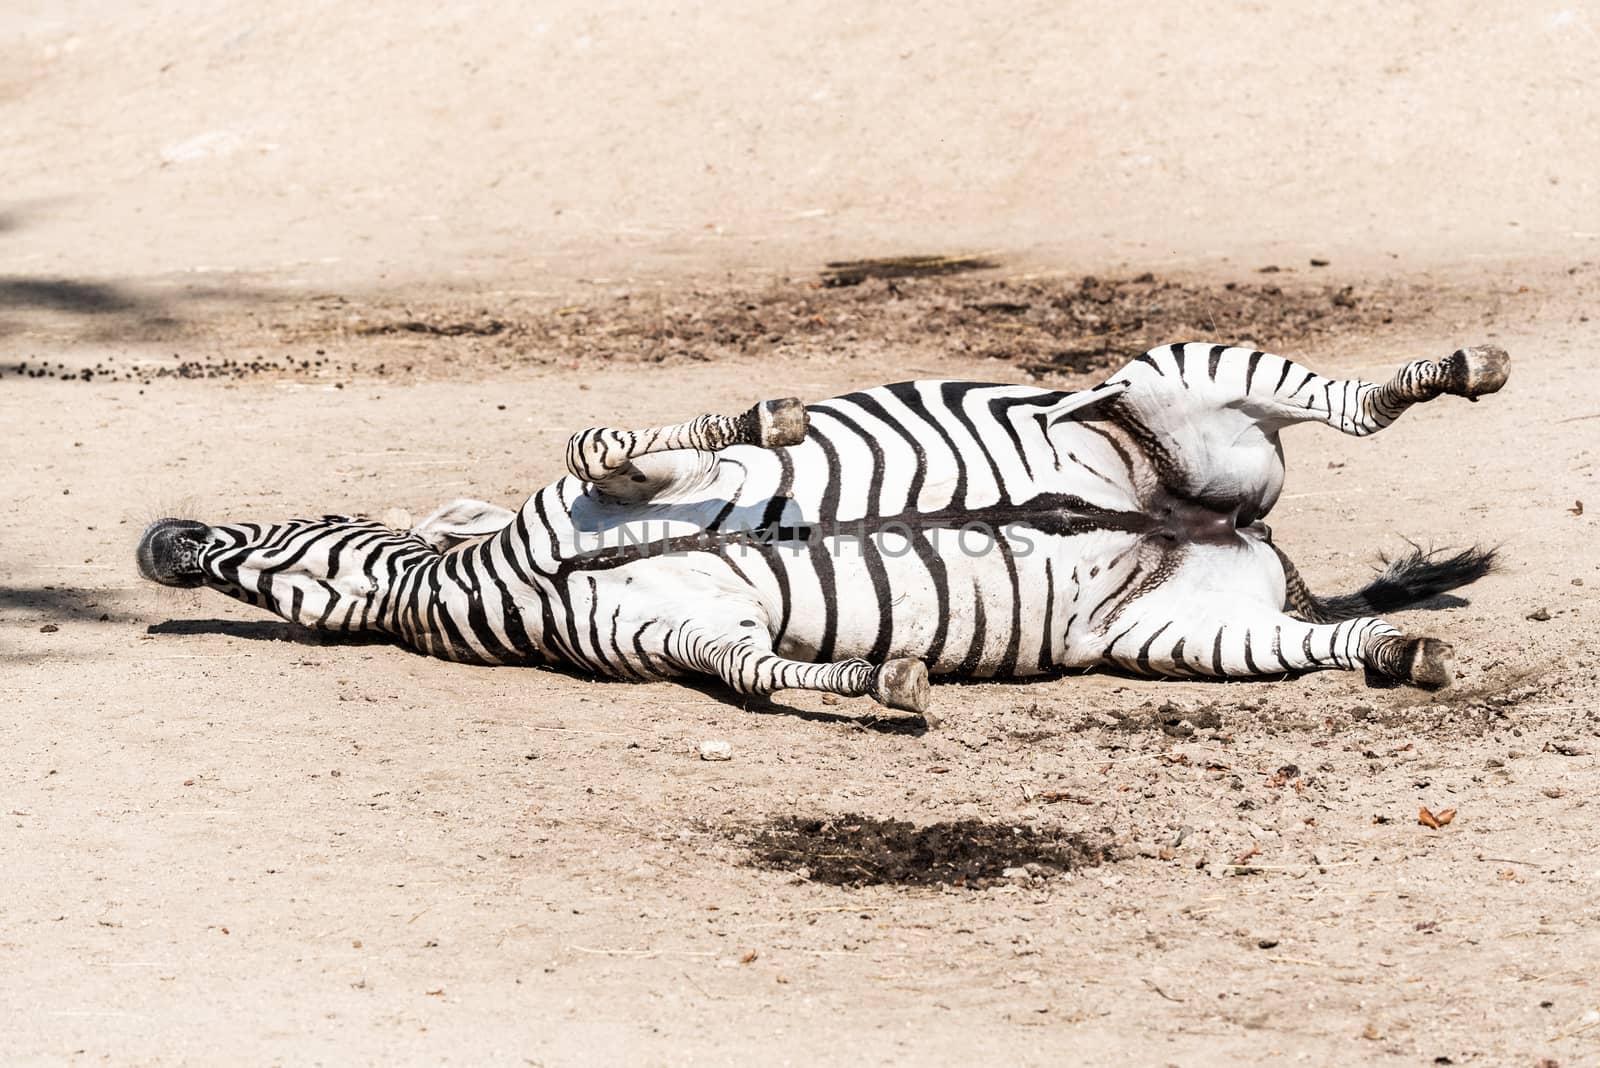 Zebra wallowing on the dusty ground. Funny animal. Africa.